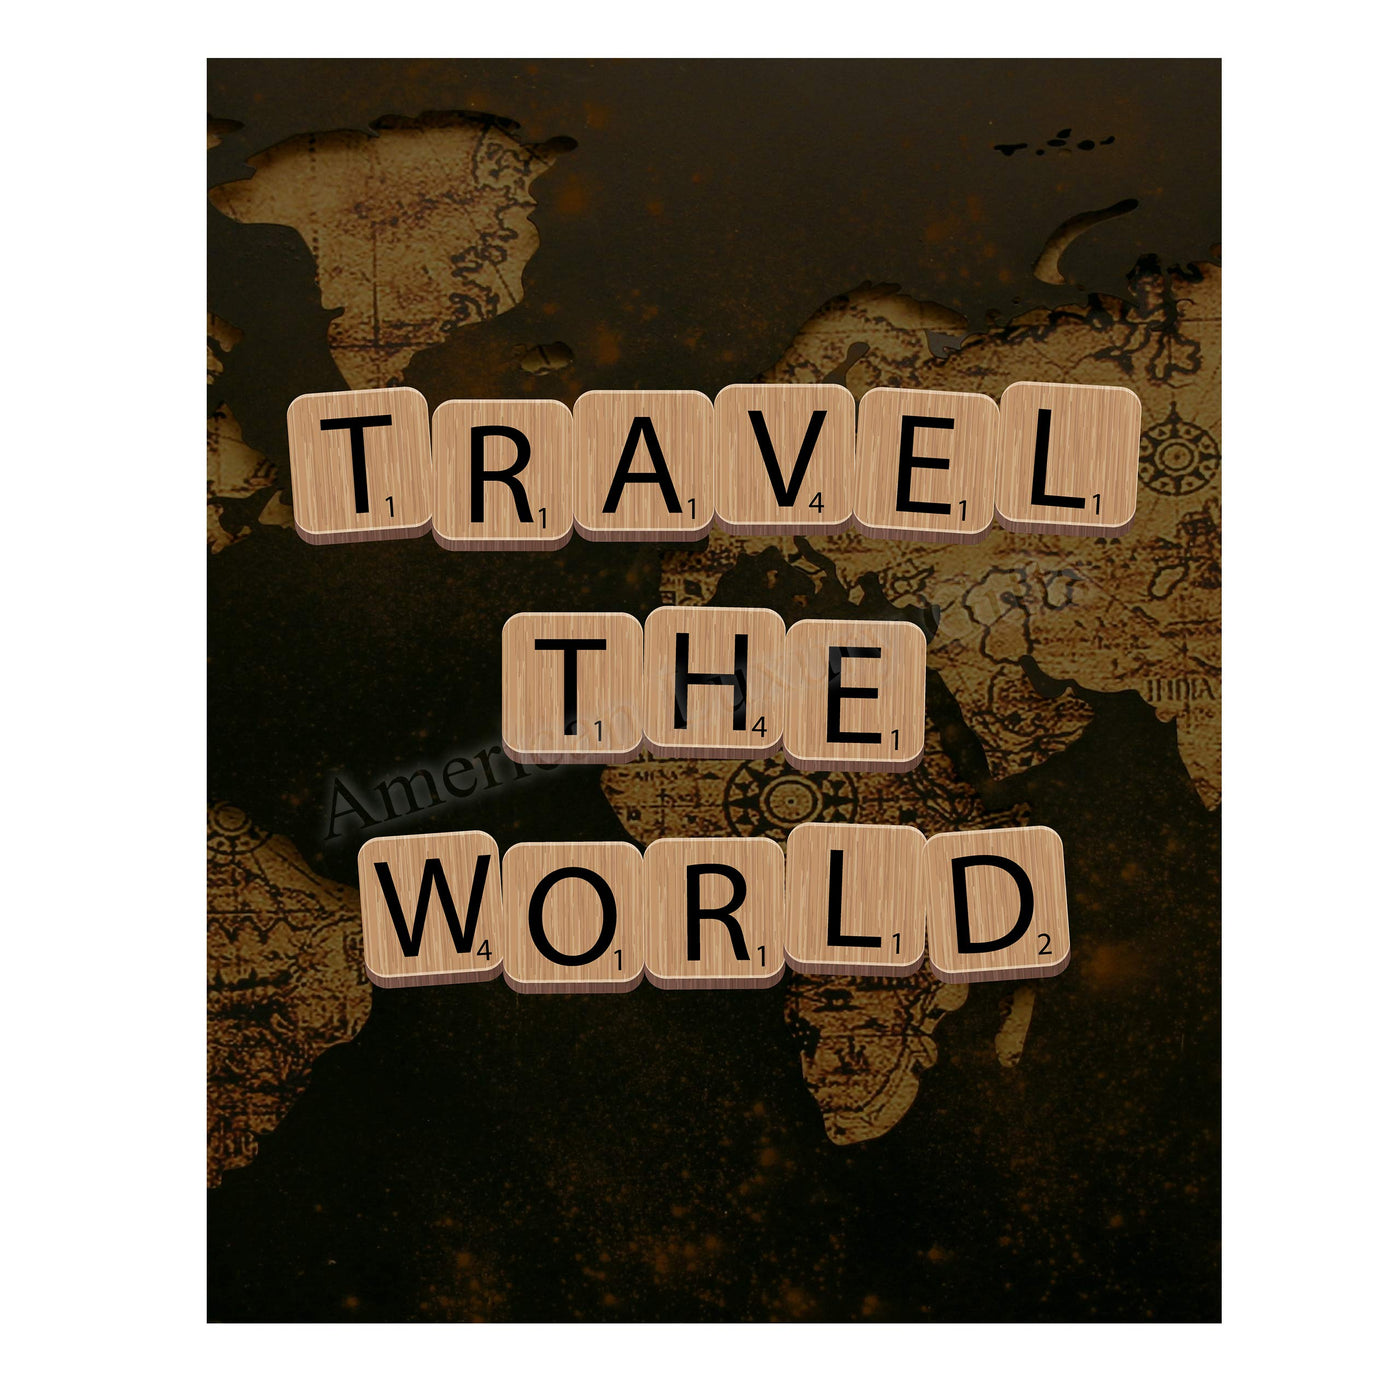 Travel the World Quotes-Map Print -11 x 14" Scrabble Piece Wall Art Print-Ready to Frame. Inspirational Home-Office-School-Library Decor. Funny Gift for Travelers & Companions. Road Trip!